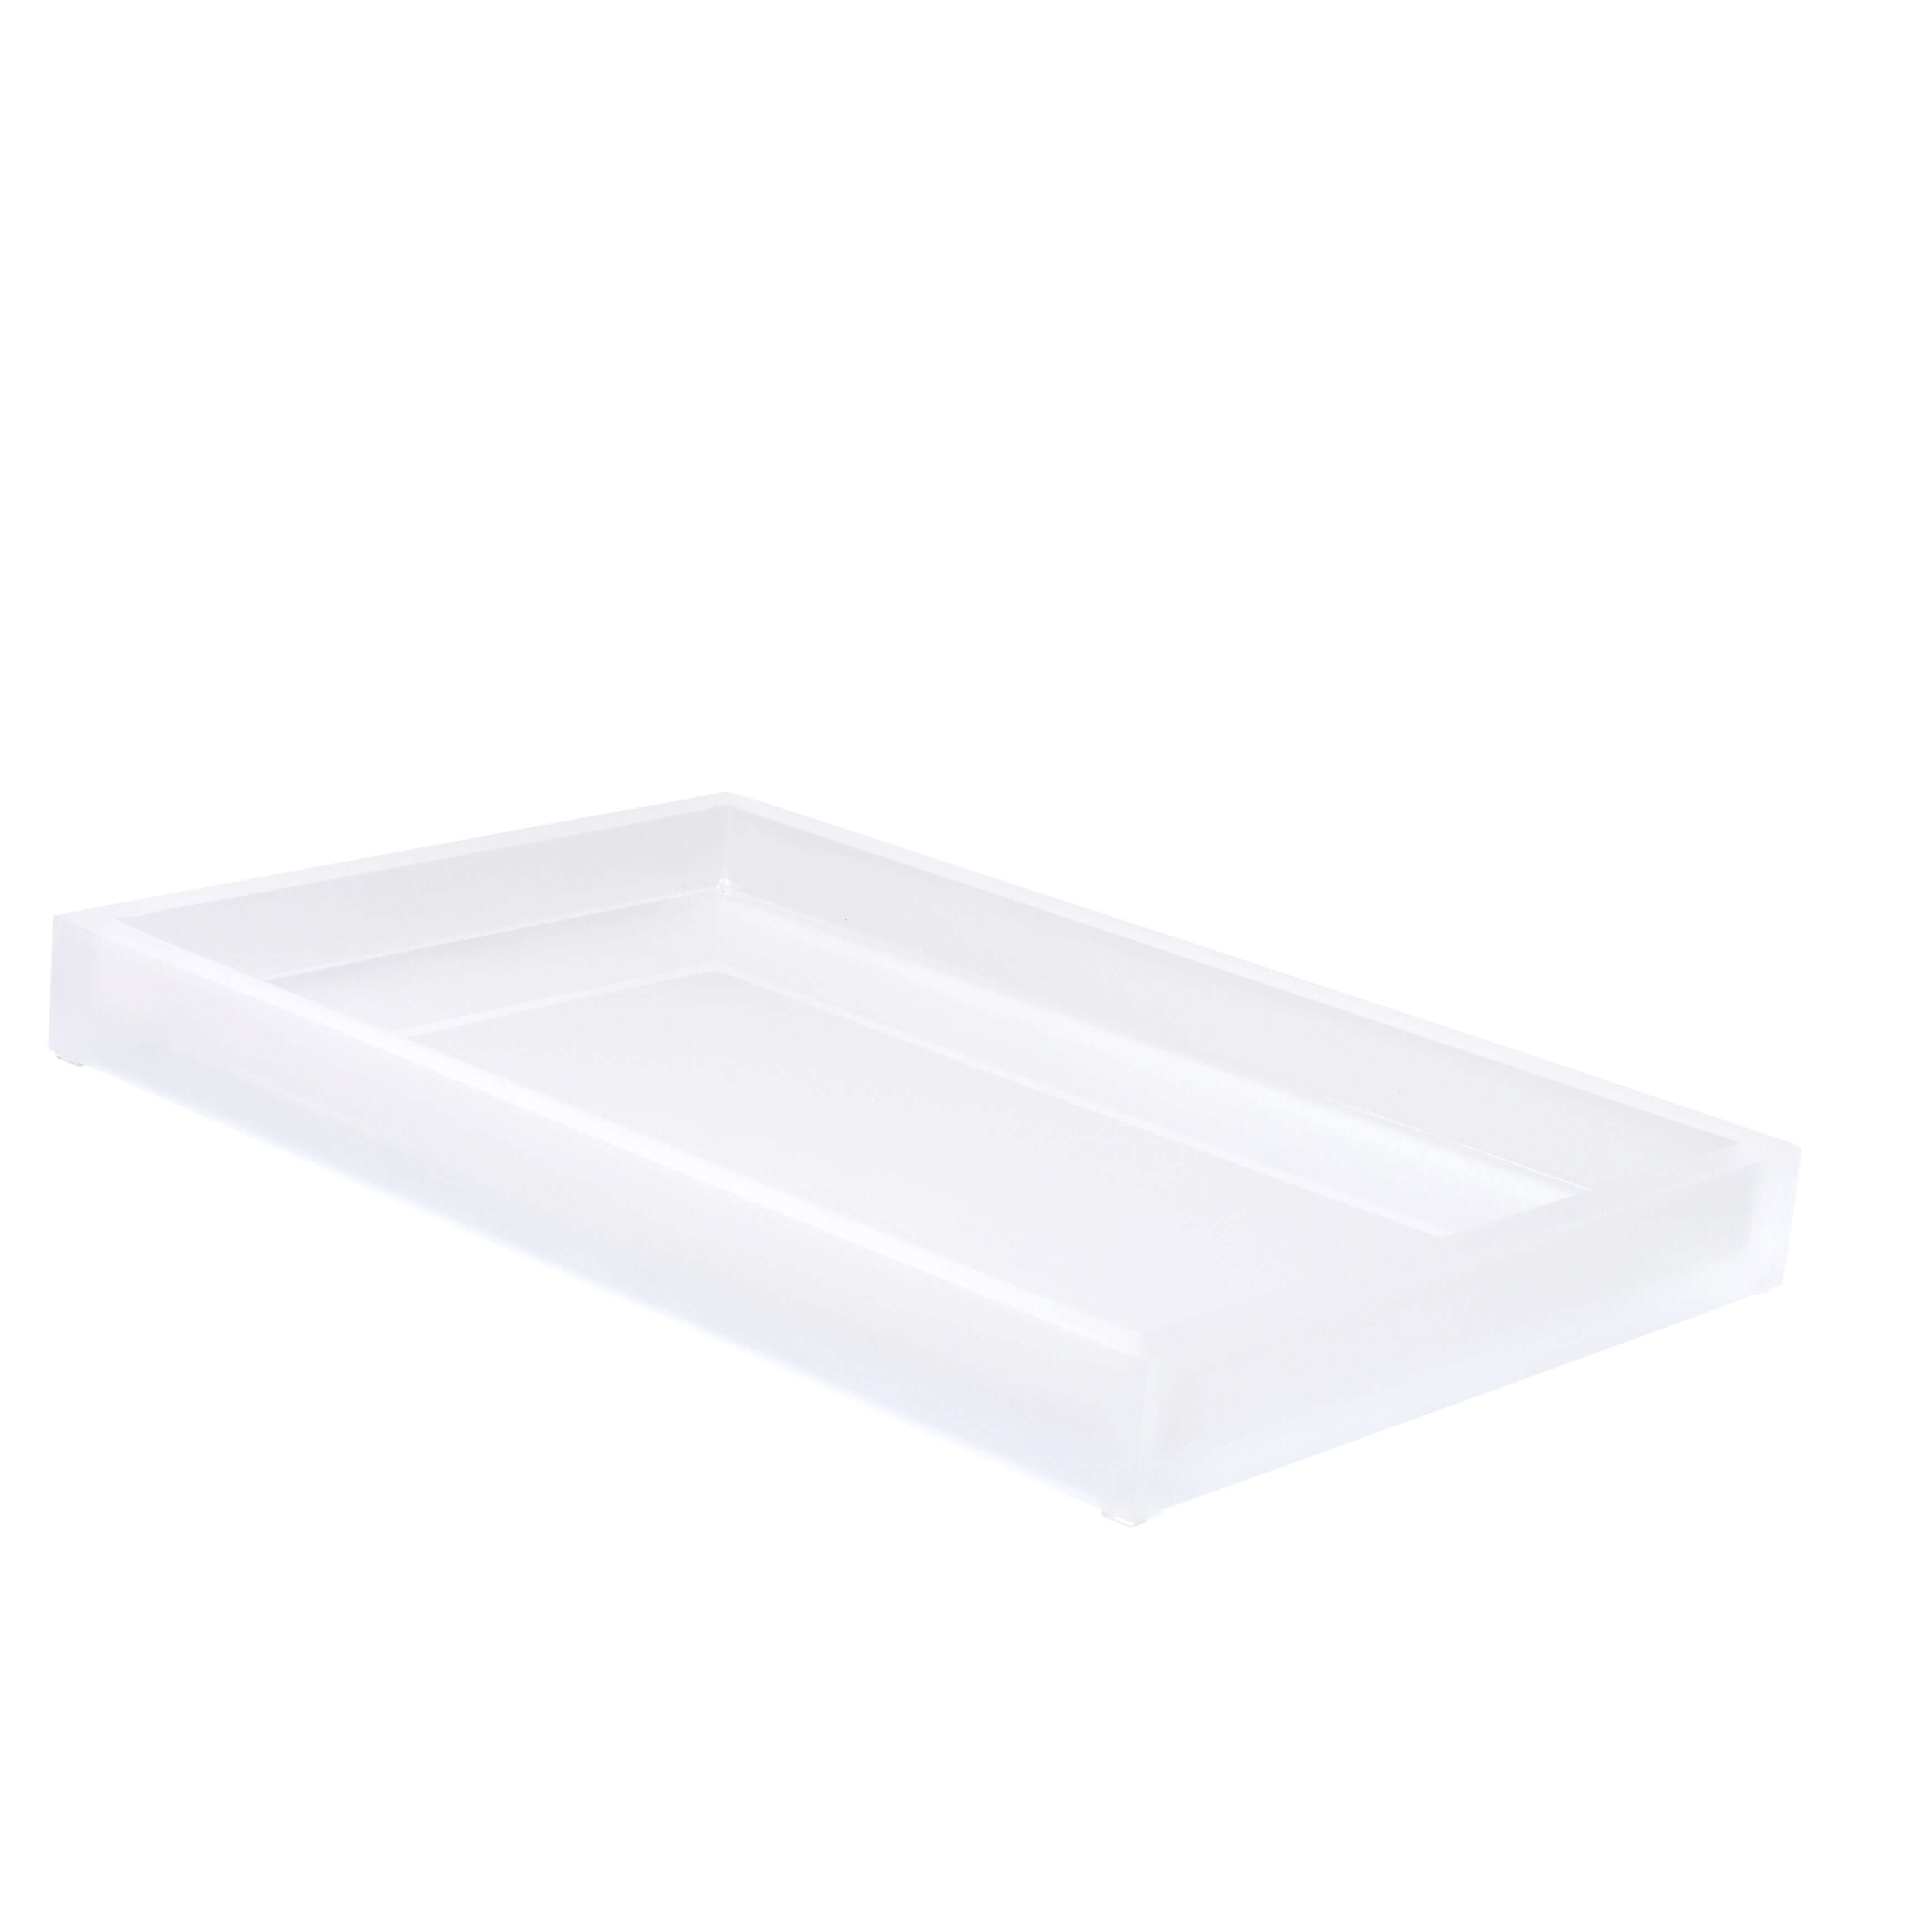 Mike + Ally - Ice Frosted Snow Large Vanity Tray - 31117 - White - 